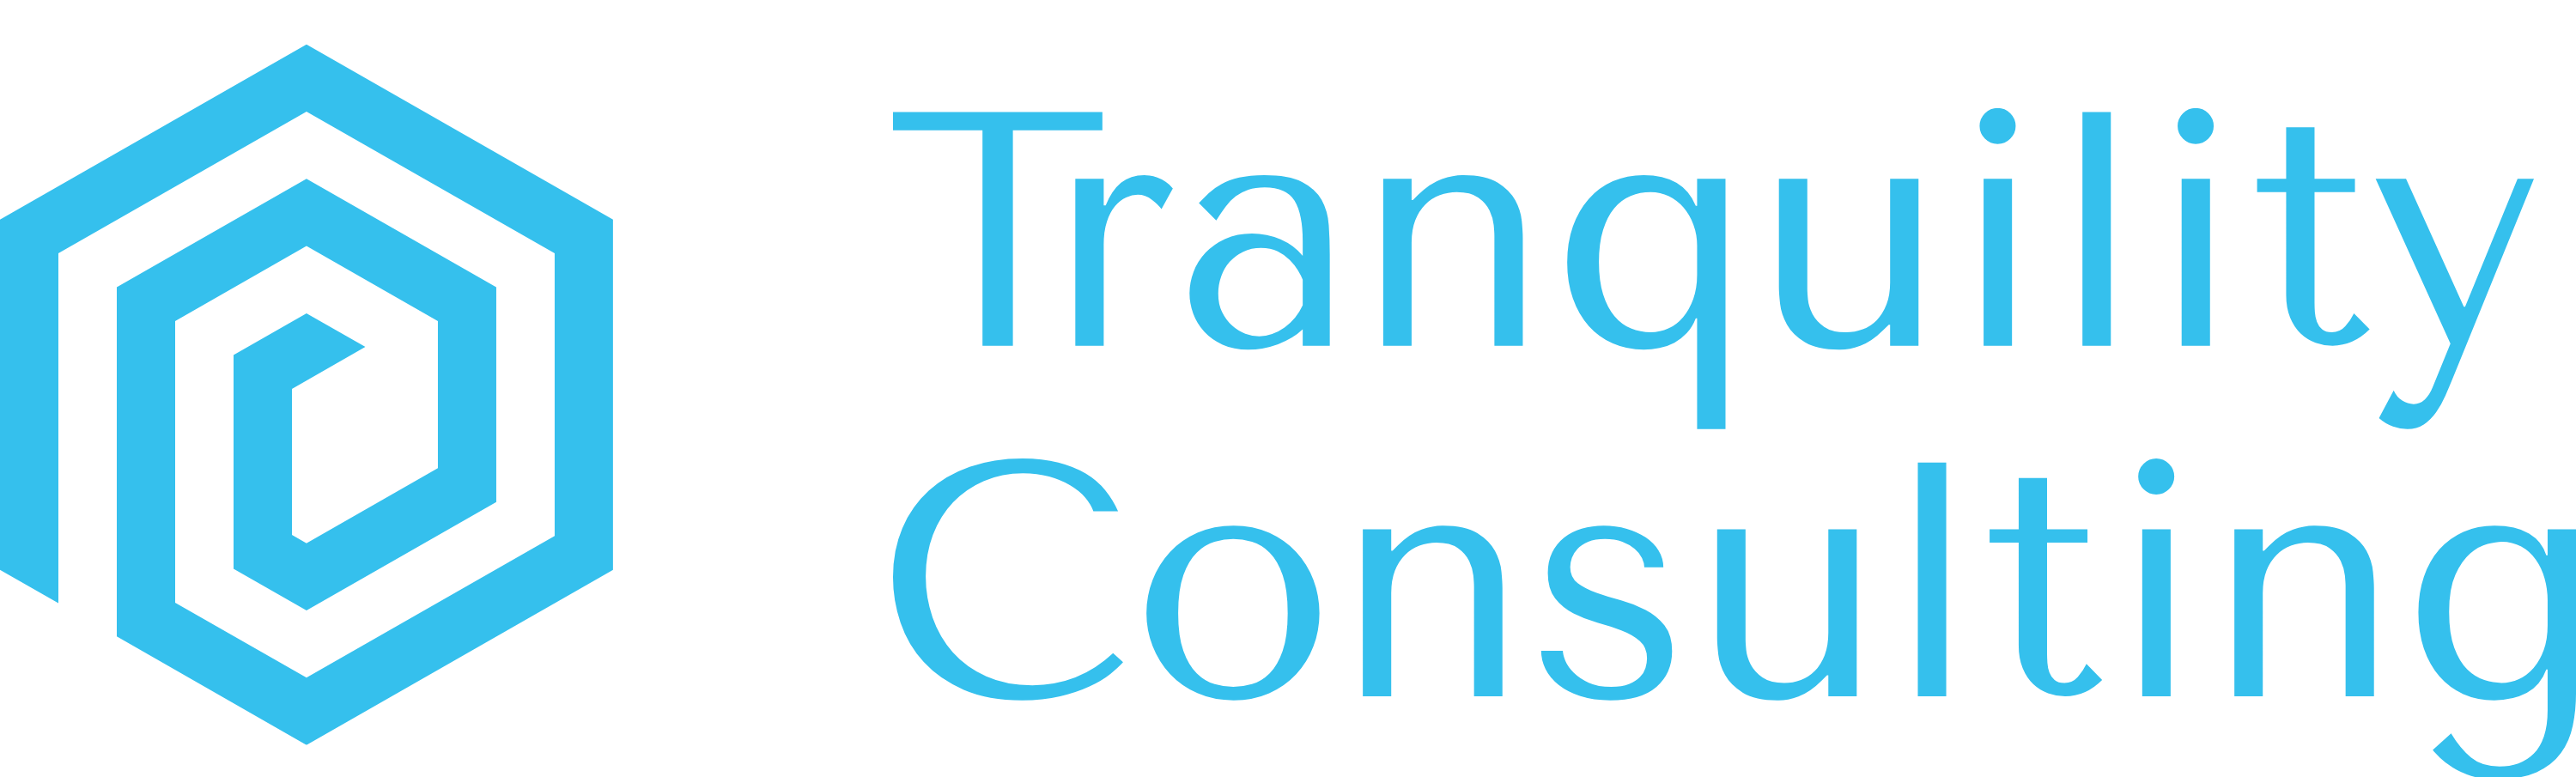 Tranquility Consulting Logo